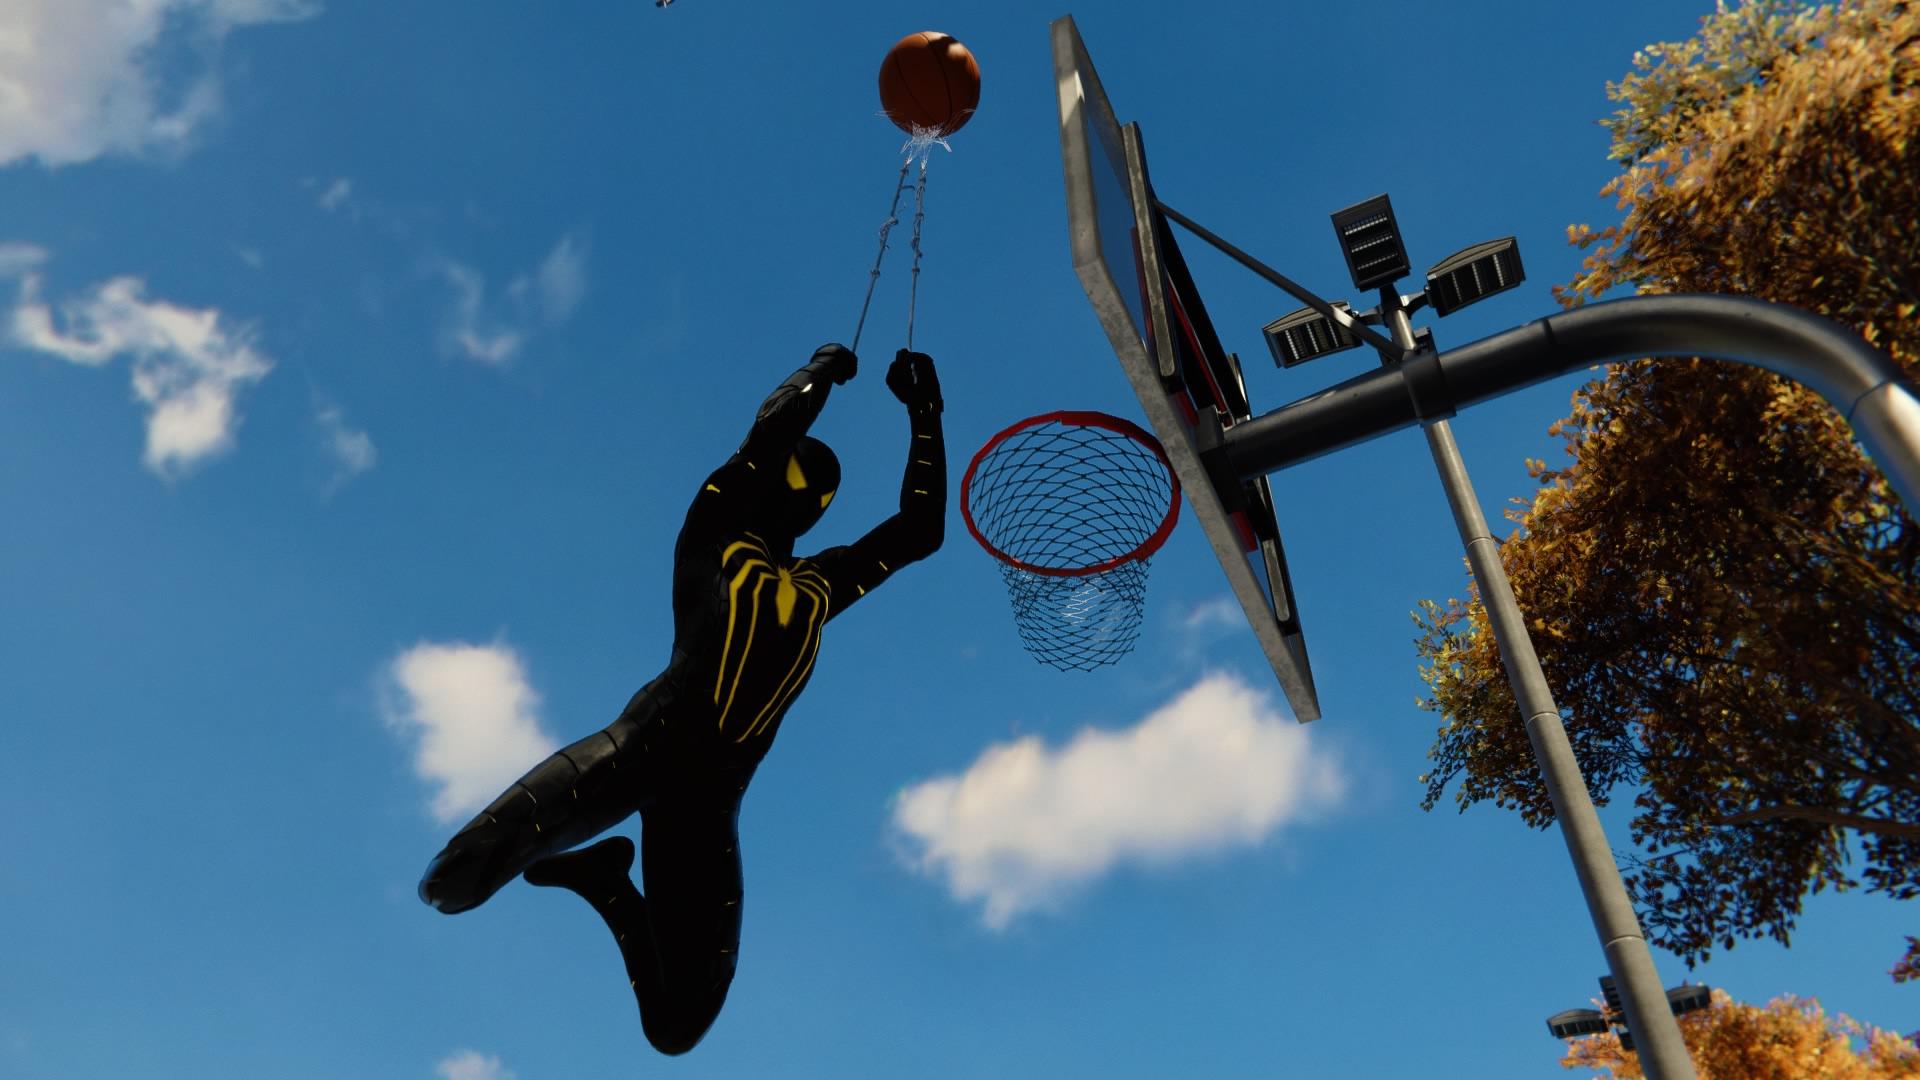 I love dunking in this game: SpidermanPS4